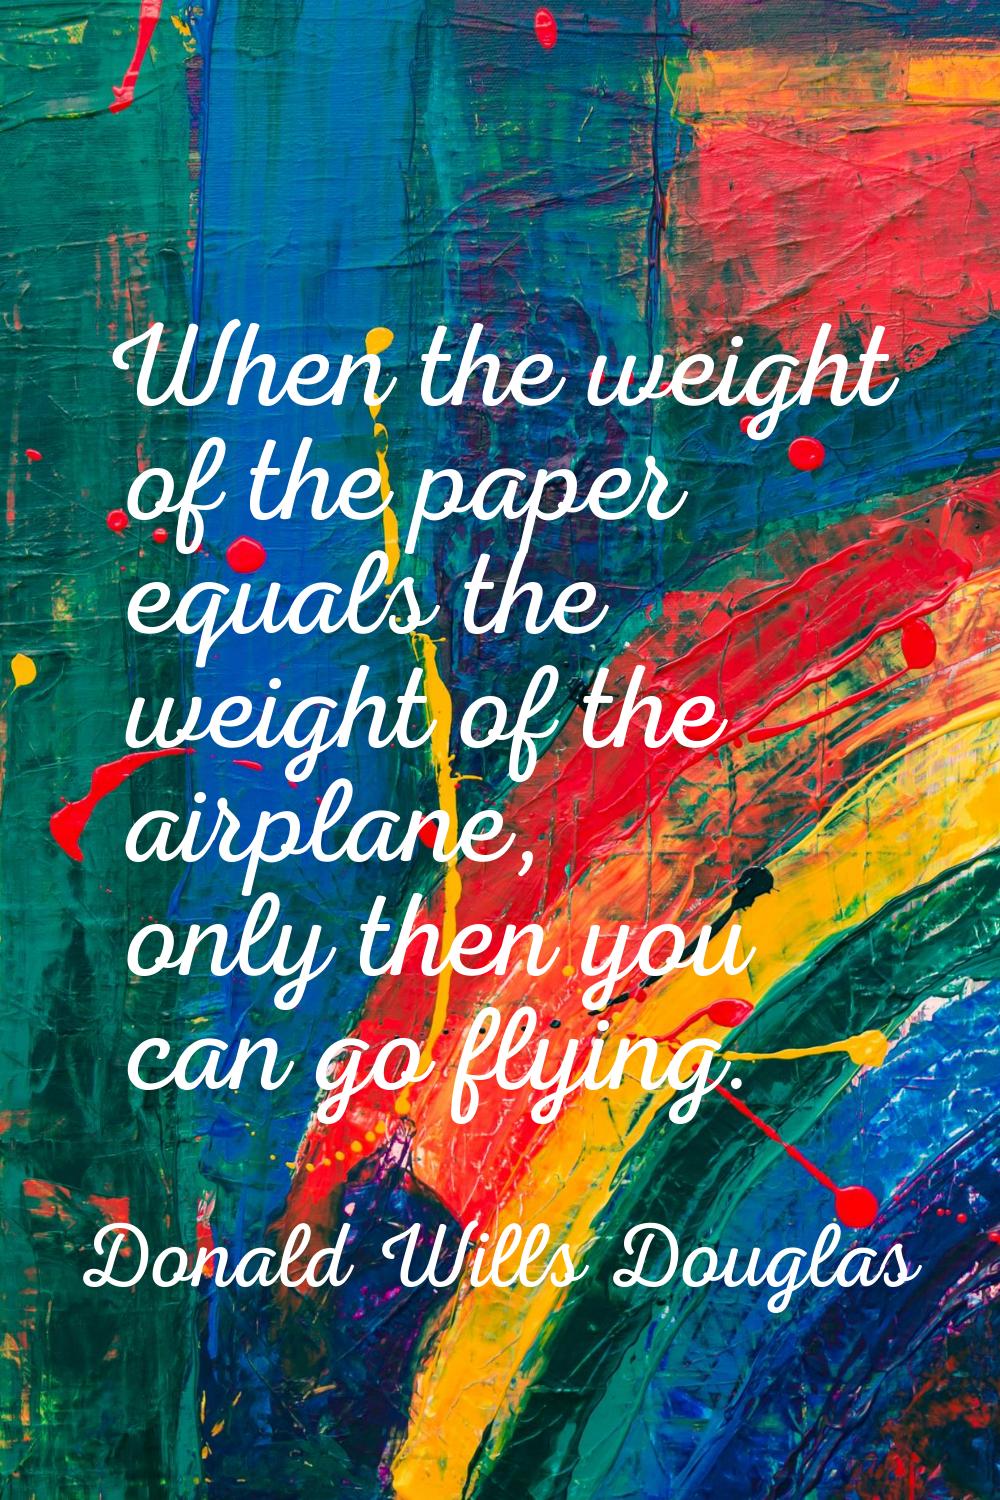 When the weight of the paper equals the weight of the airplane, only then you can go flying.